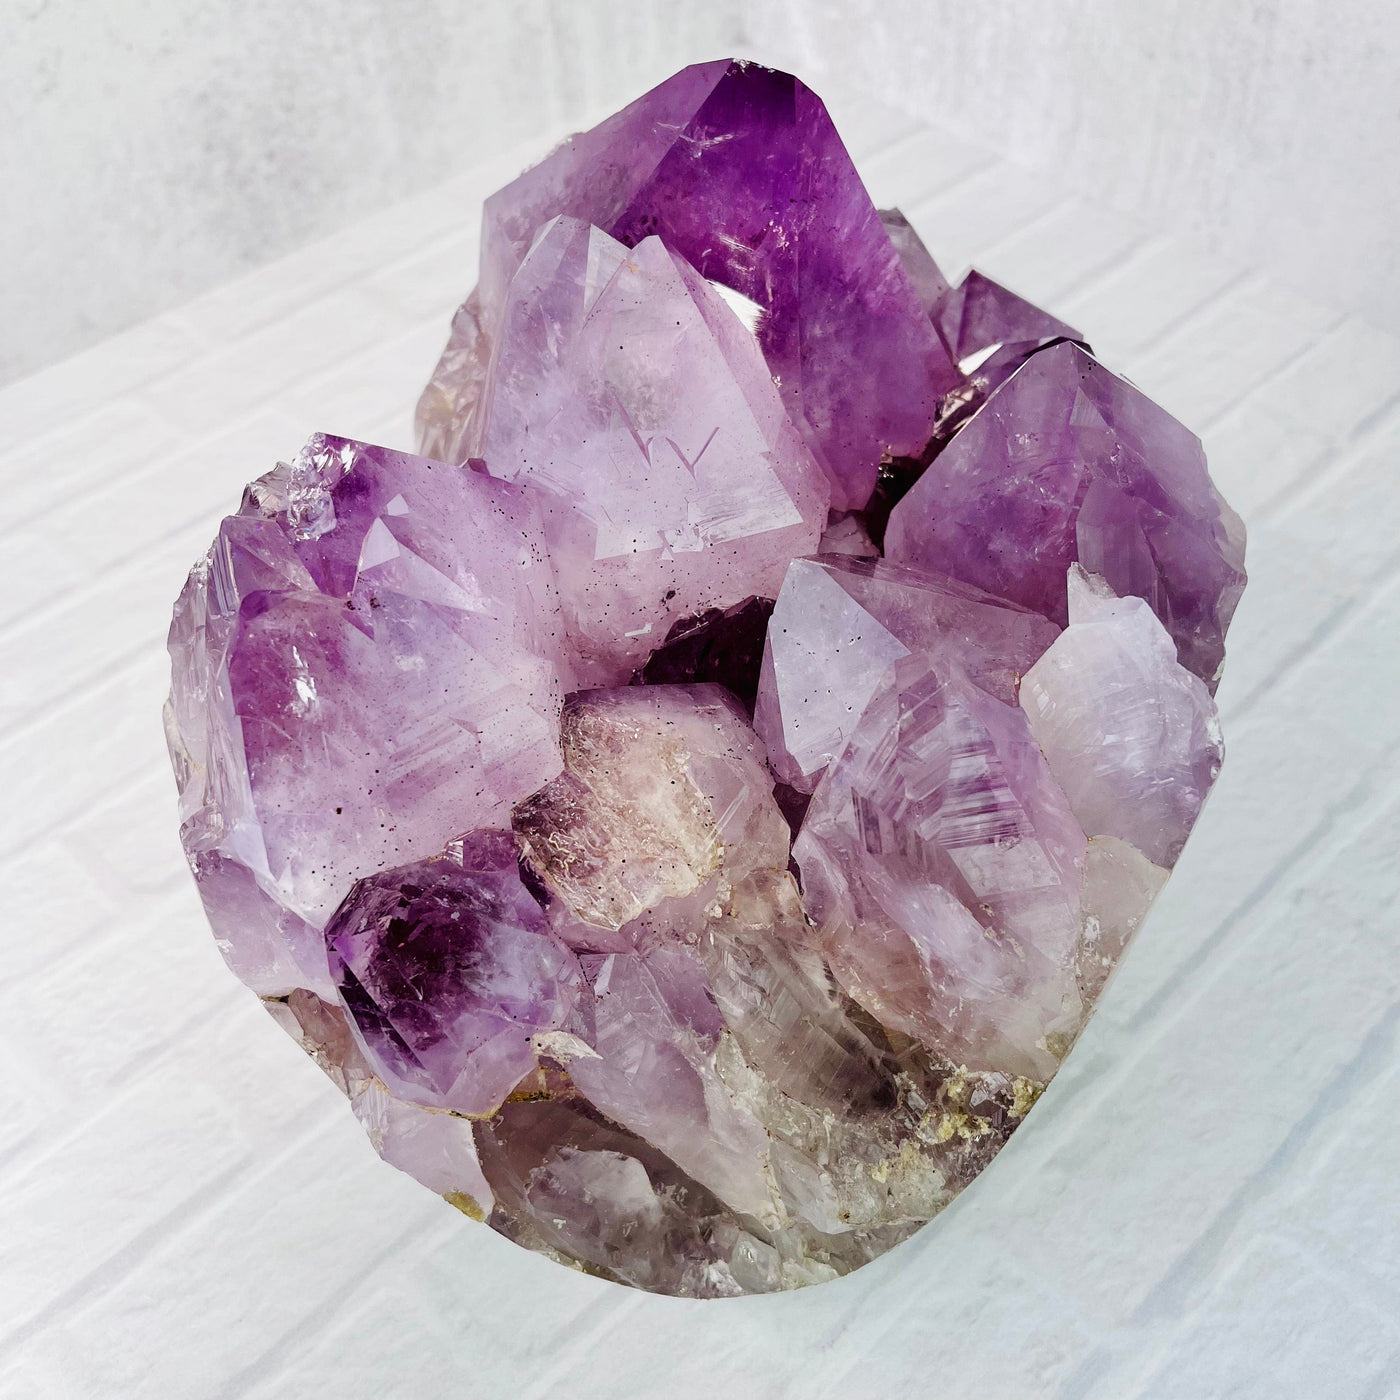 Aerial view of the Large Amethyst Point Cluster on a white surface.